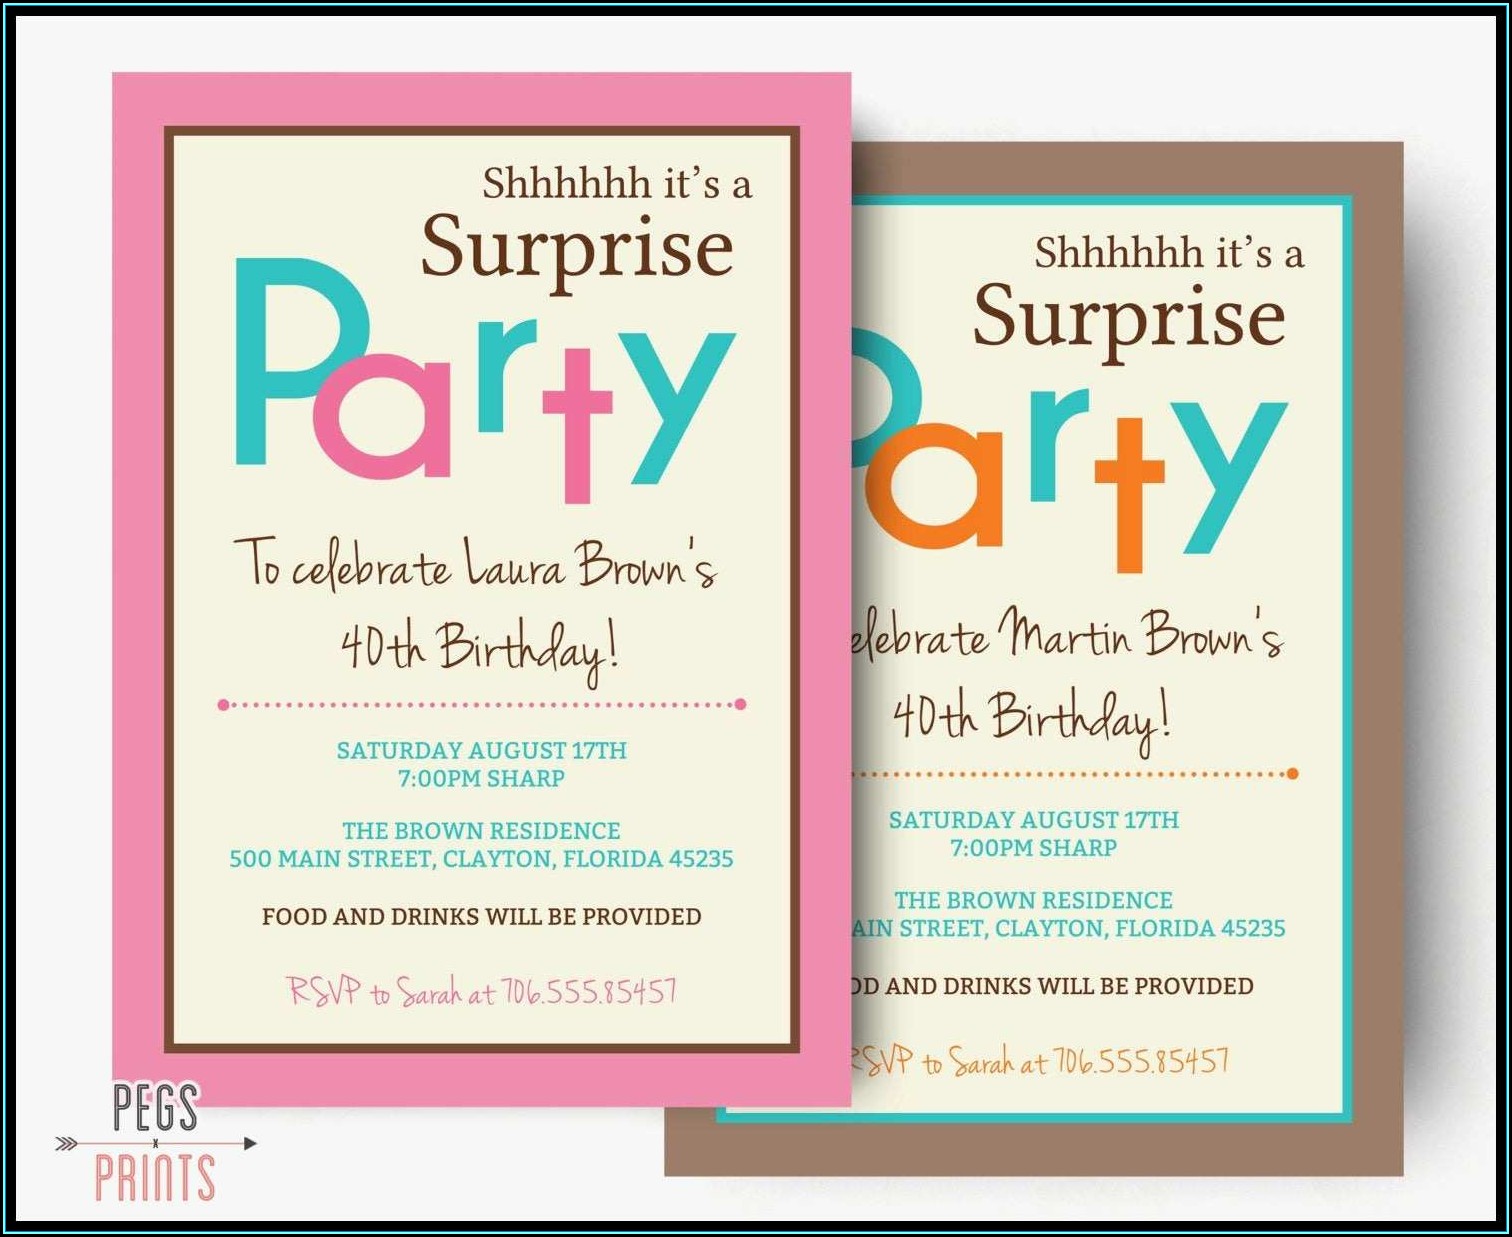 Surprise Party Invitation Samples